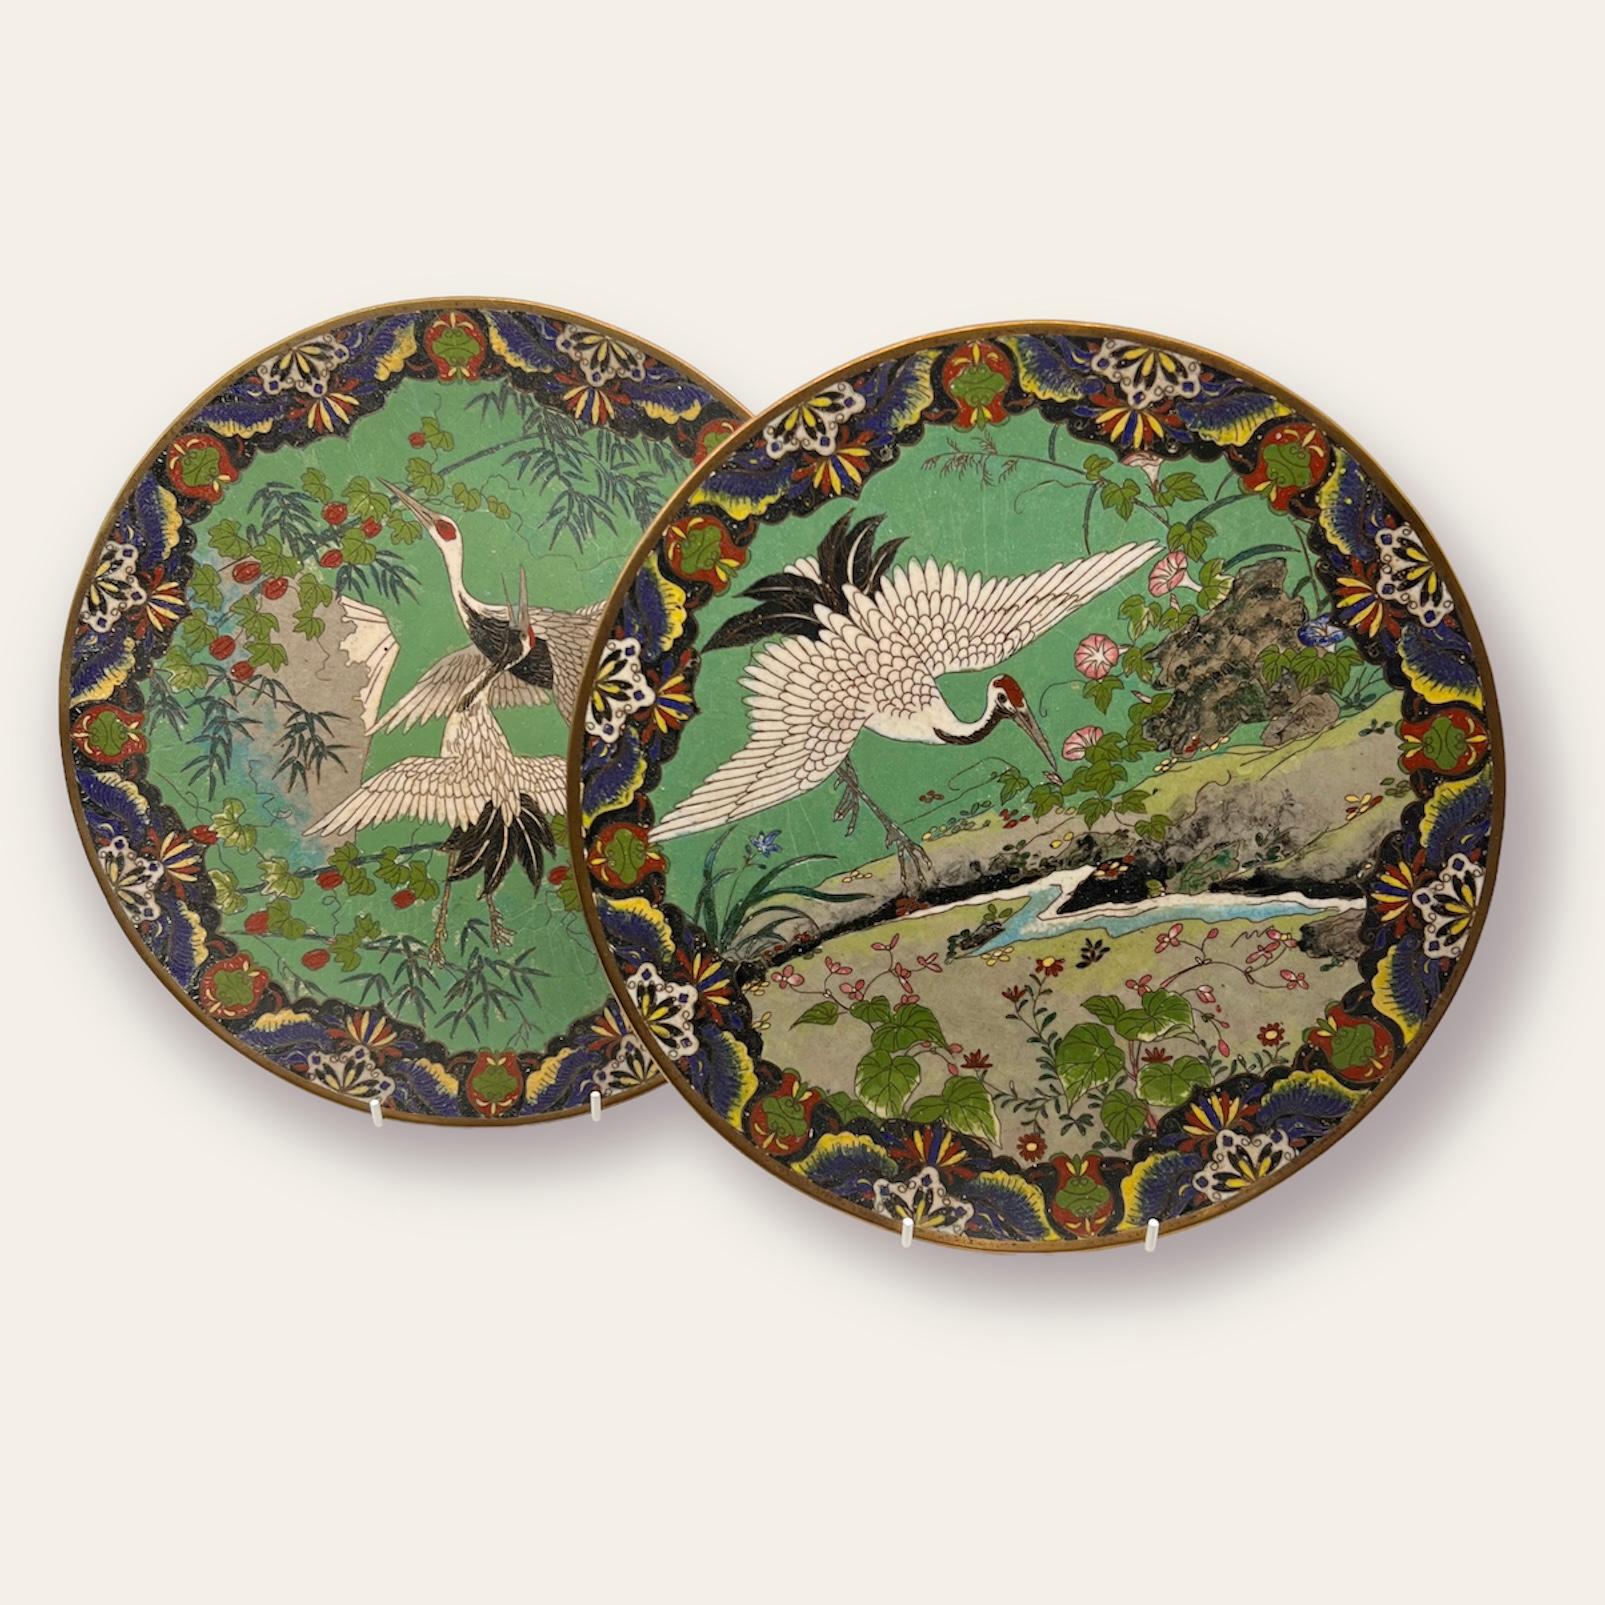 19th Century Exquisite Pair of Japanese Cloisonne on Bronze Chargers, Meiji Period, 19th C